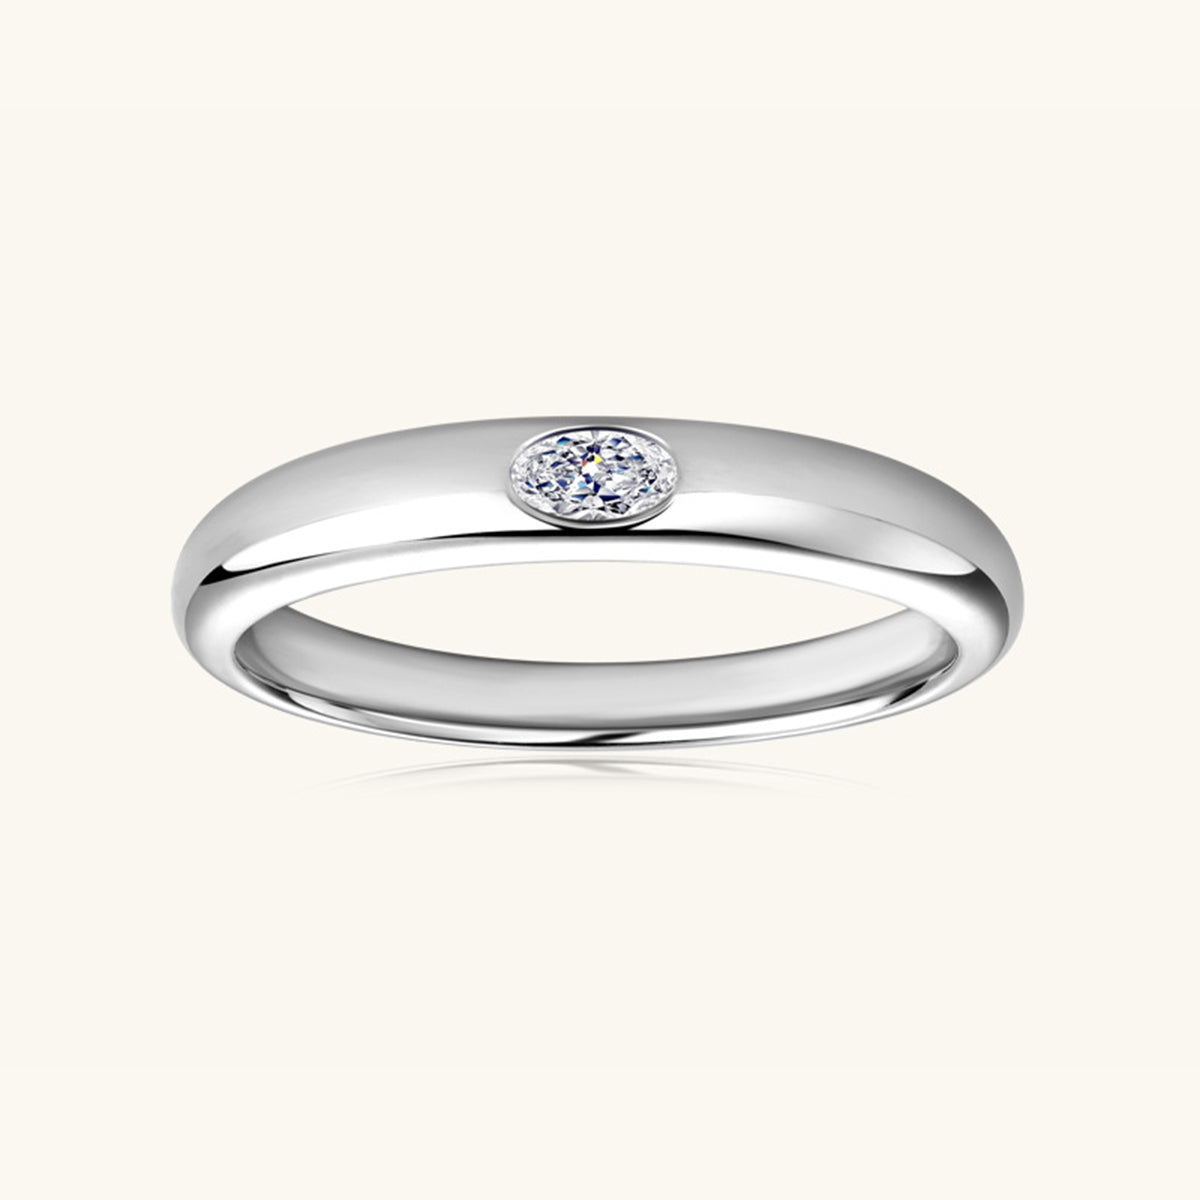 STERLING SILVER INLAID MOISSANITE RING